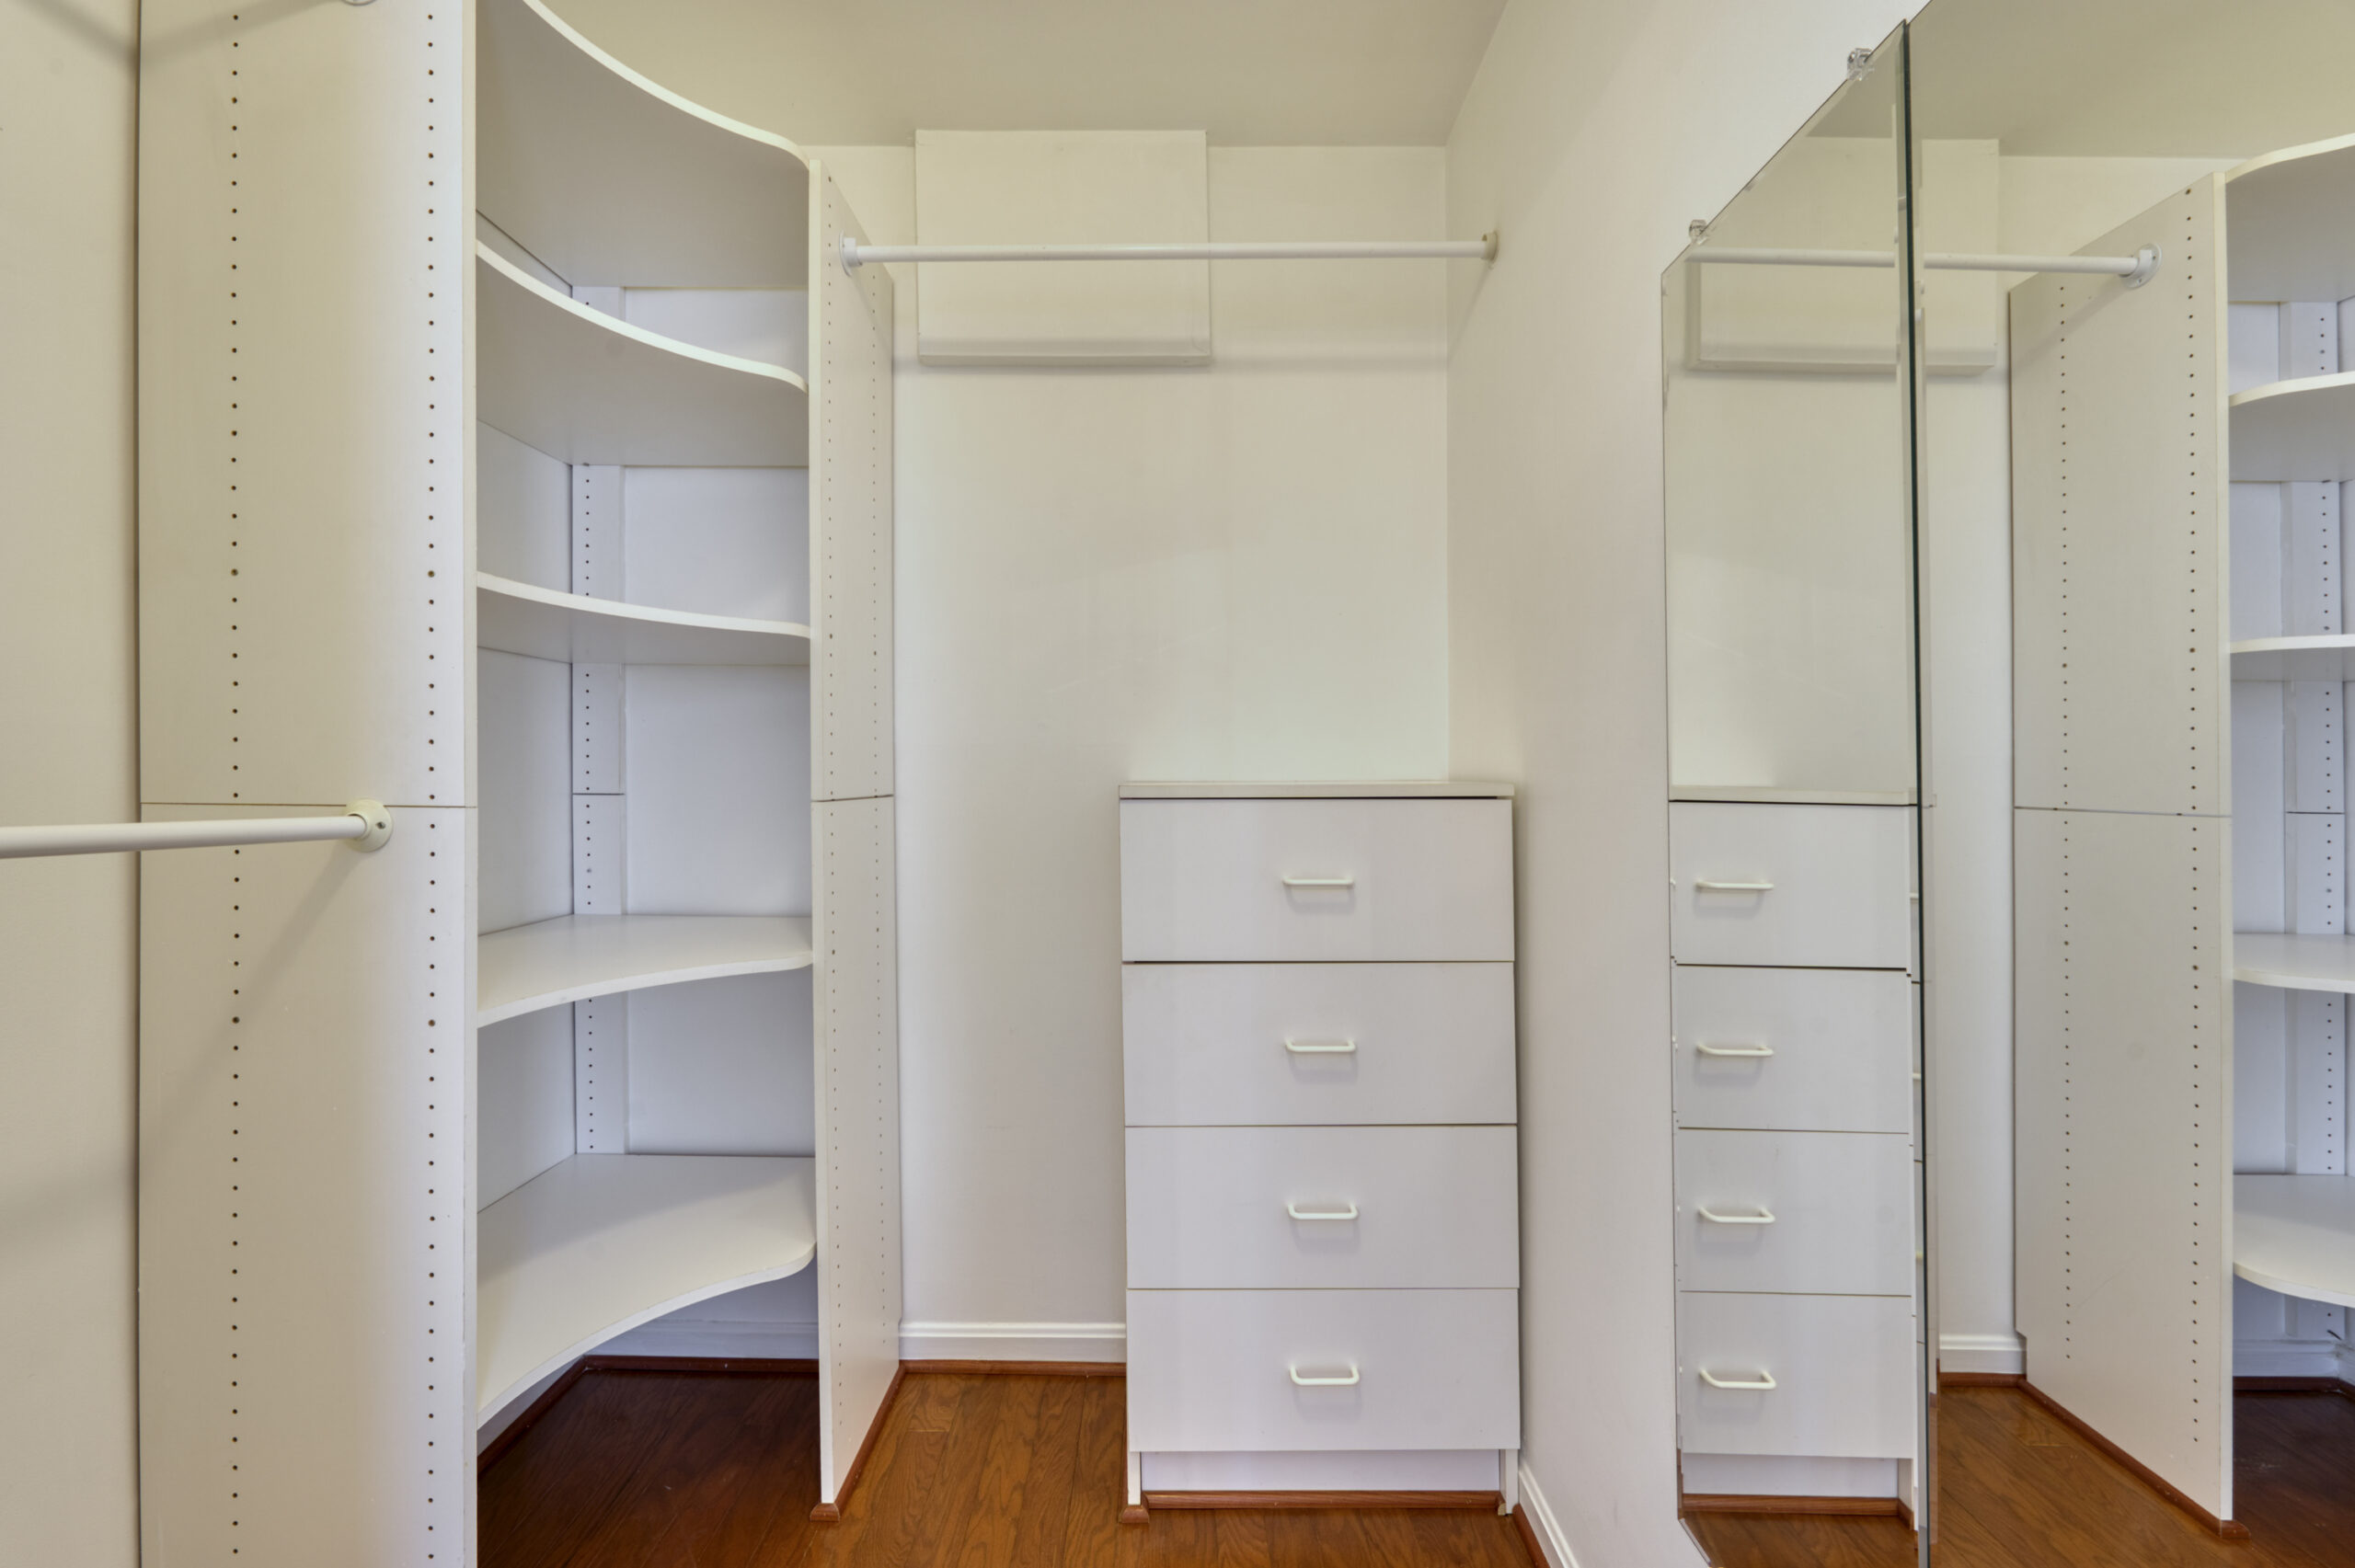 Professional interior photo of 20588 Cornstalk Ter Unit 101 - Showing the walk-in closet for one of the primary suites with built-in shelves